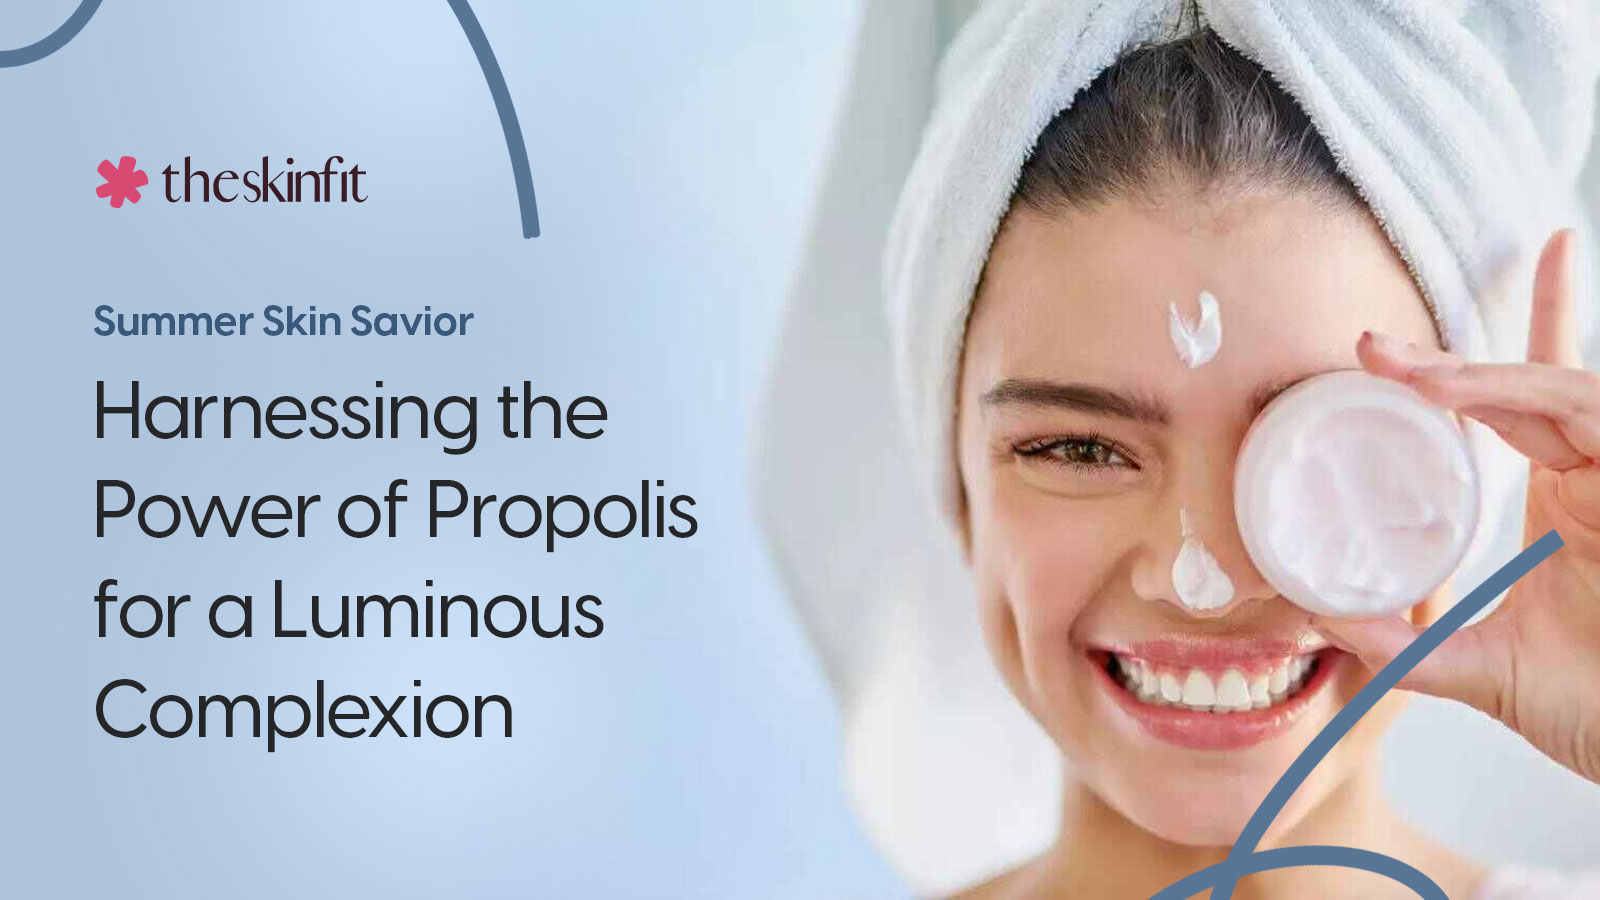 Summer Skin Savior: Harnessing the Power of Propolis for a Luminous Complexion